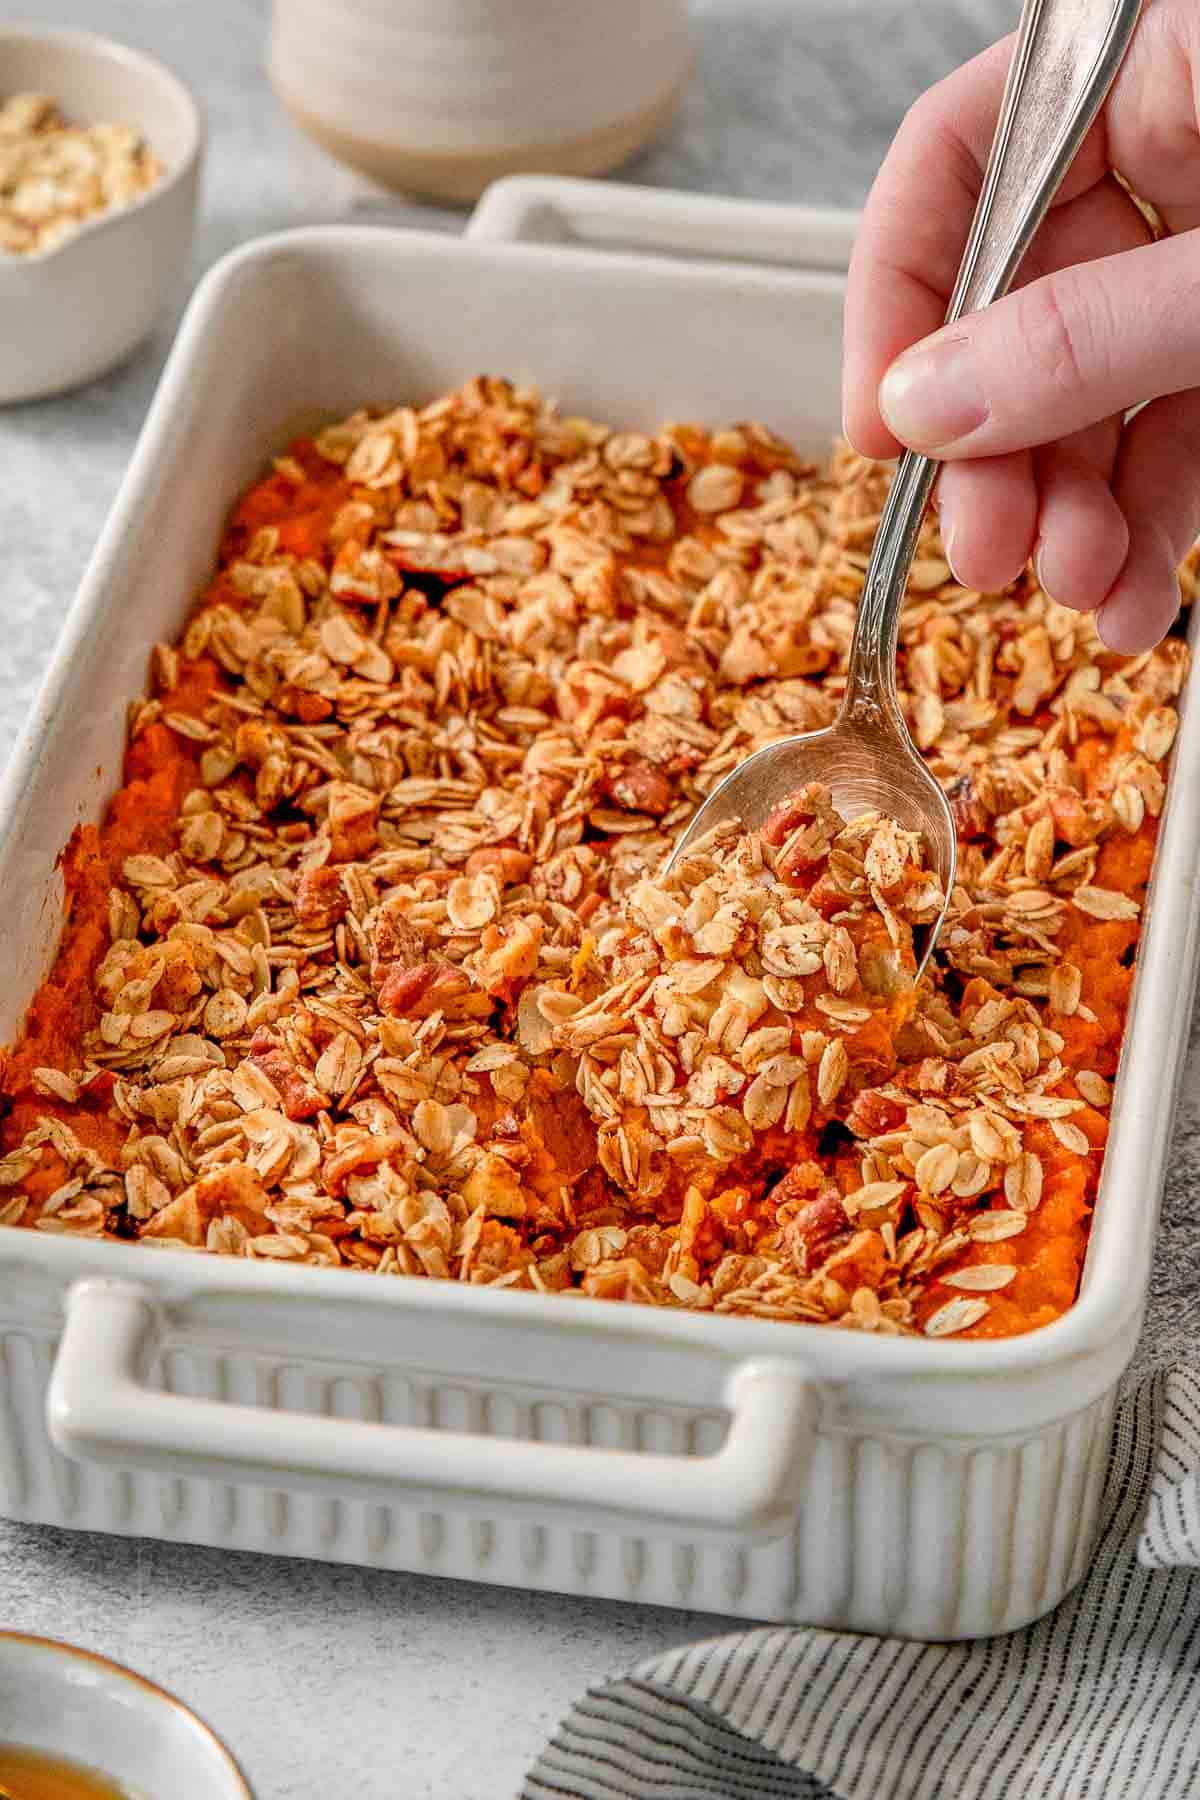 Woman's hand scooping sweet potato casserole out of a baking dish with a silver spoon.